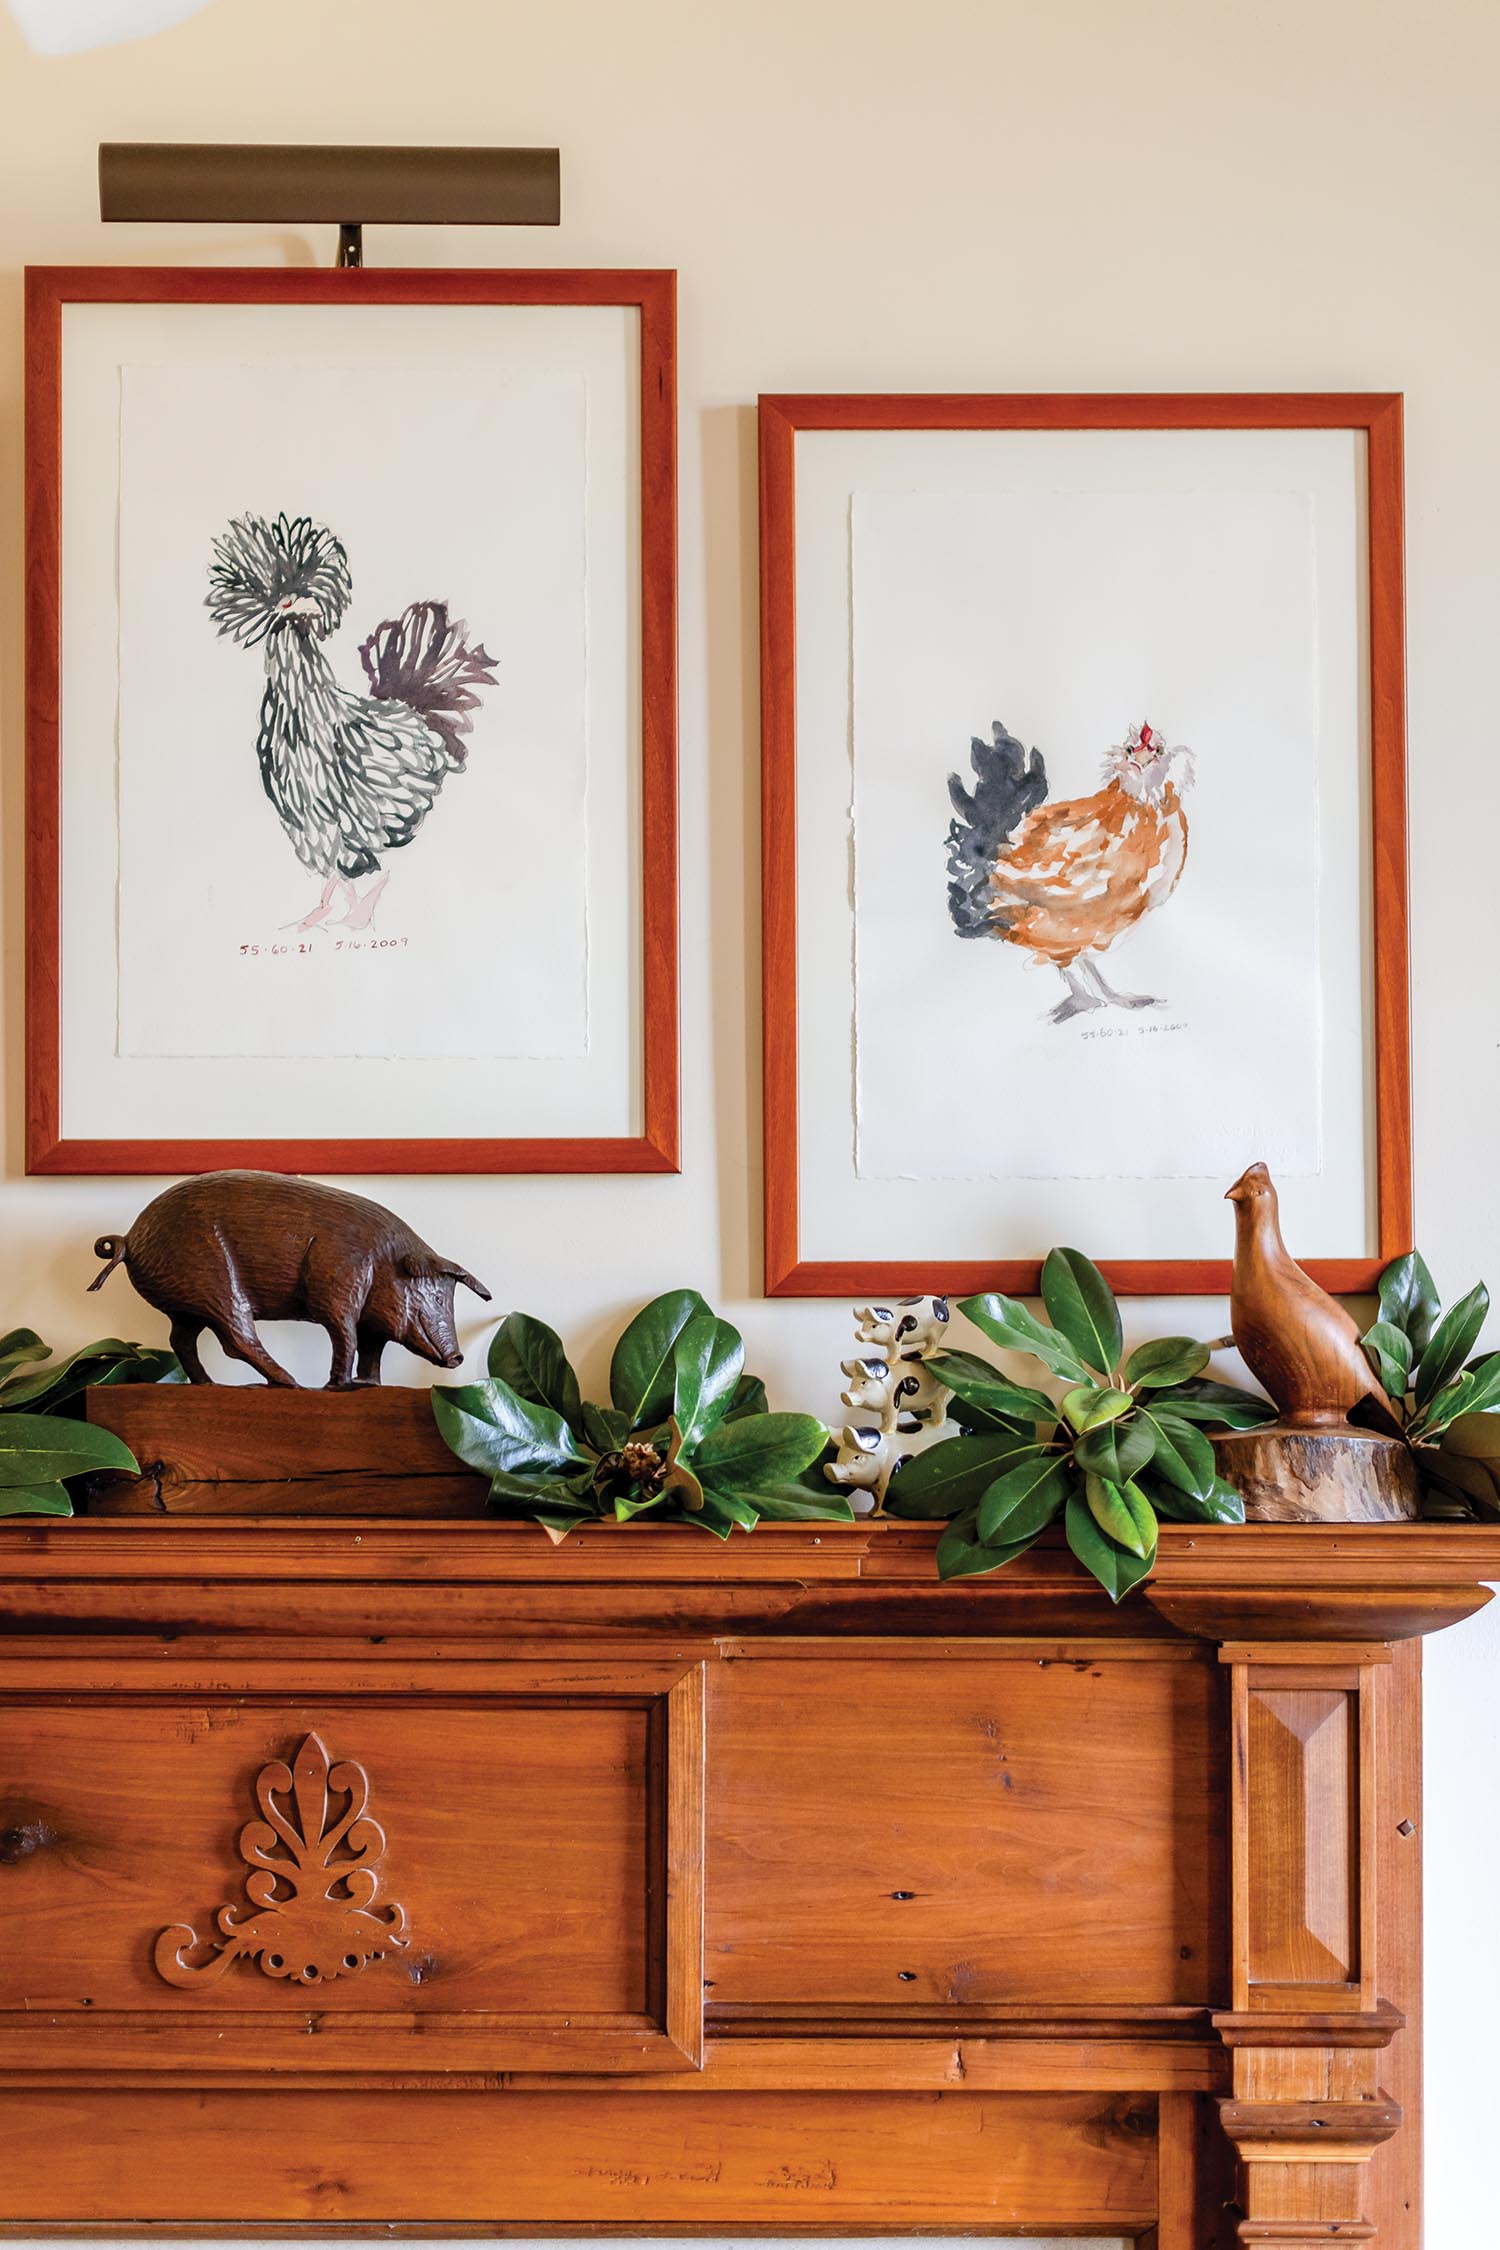 Two red-framed watercolored chickens hang above a wooden mantel holding magnolia leaves.